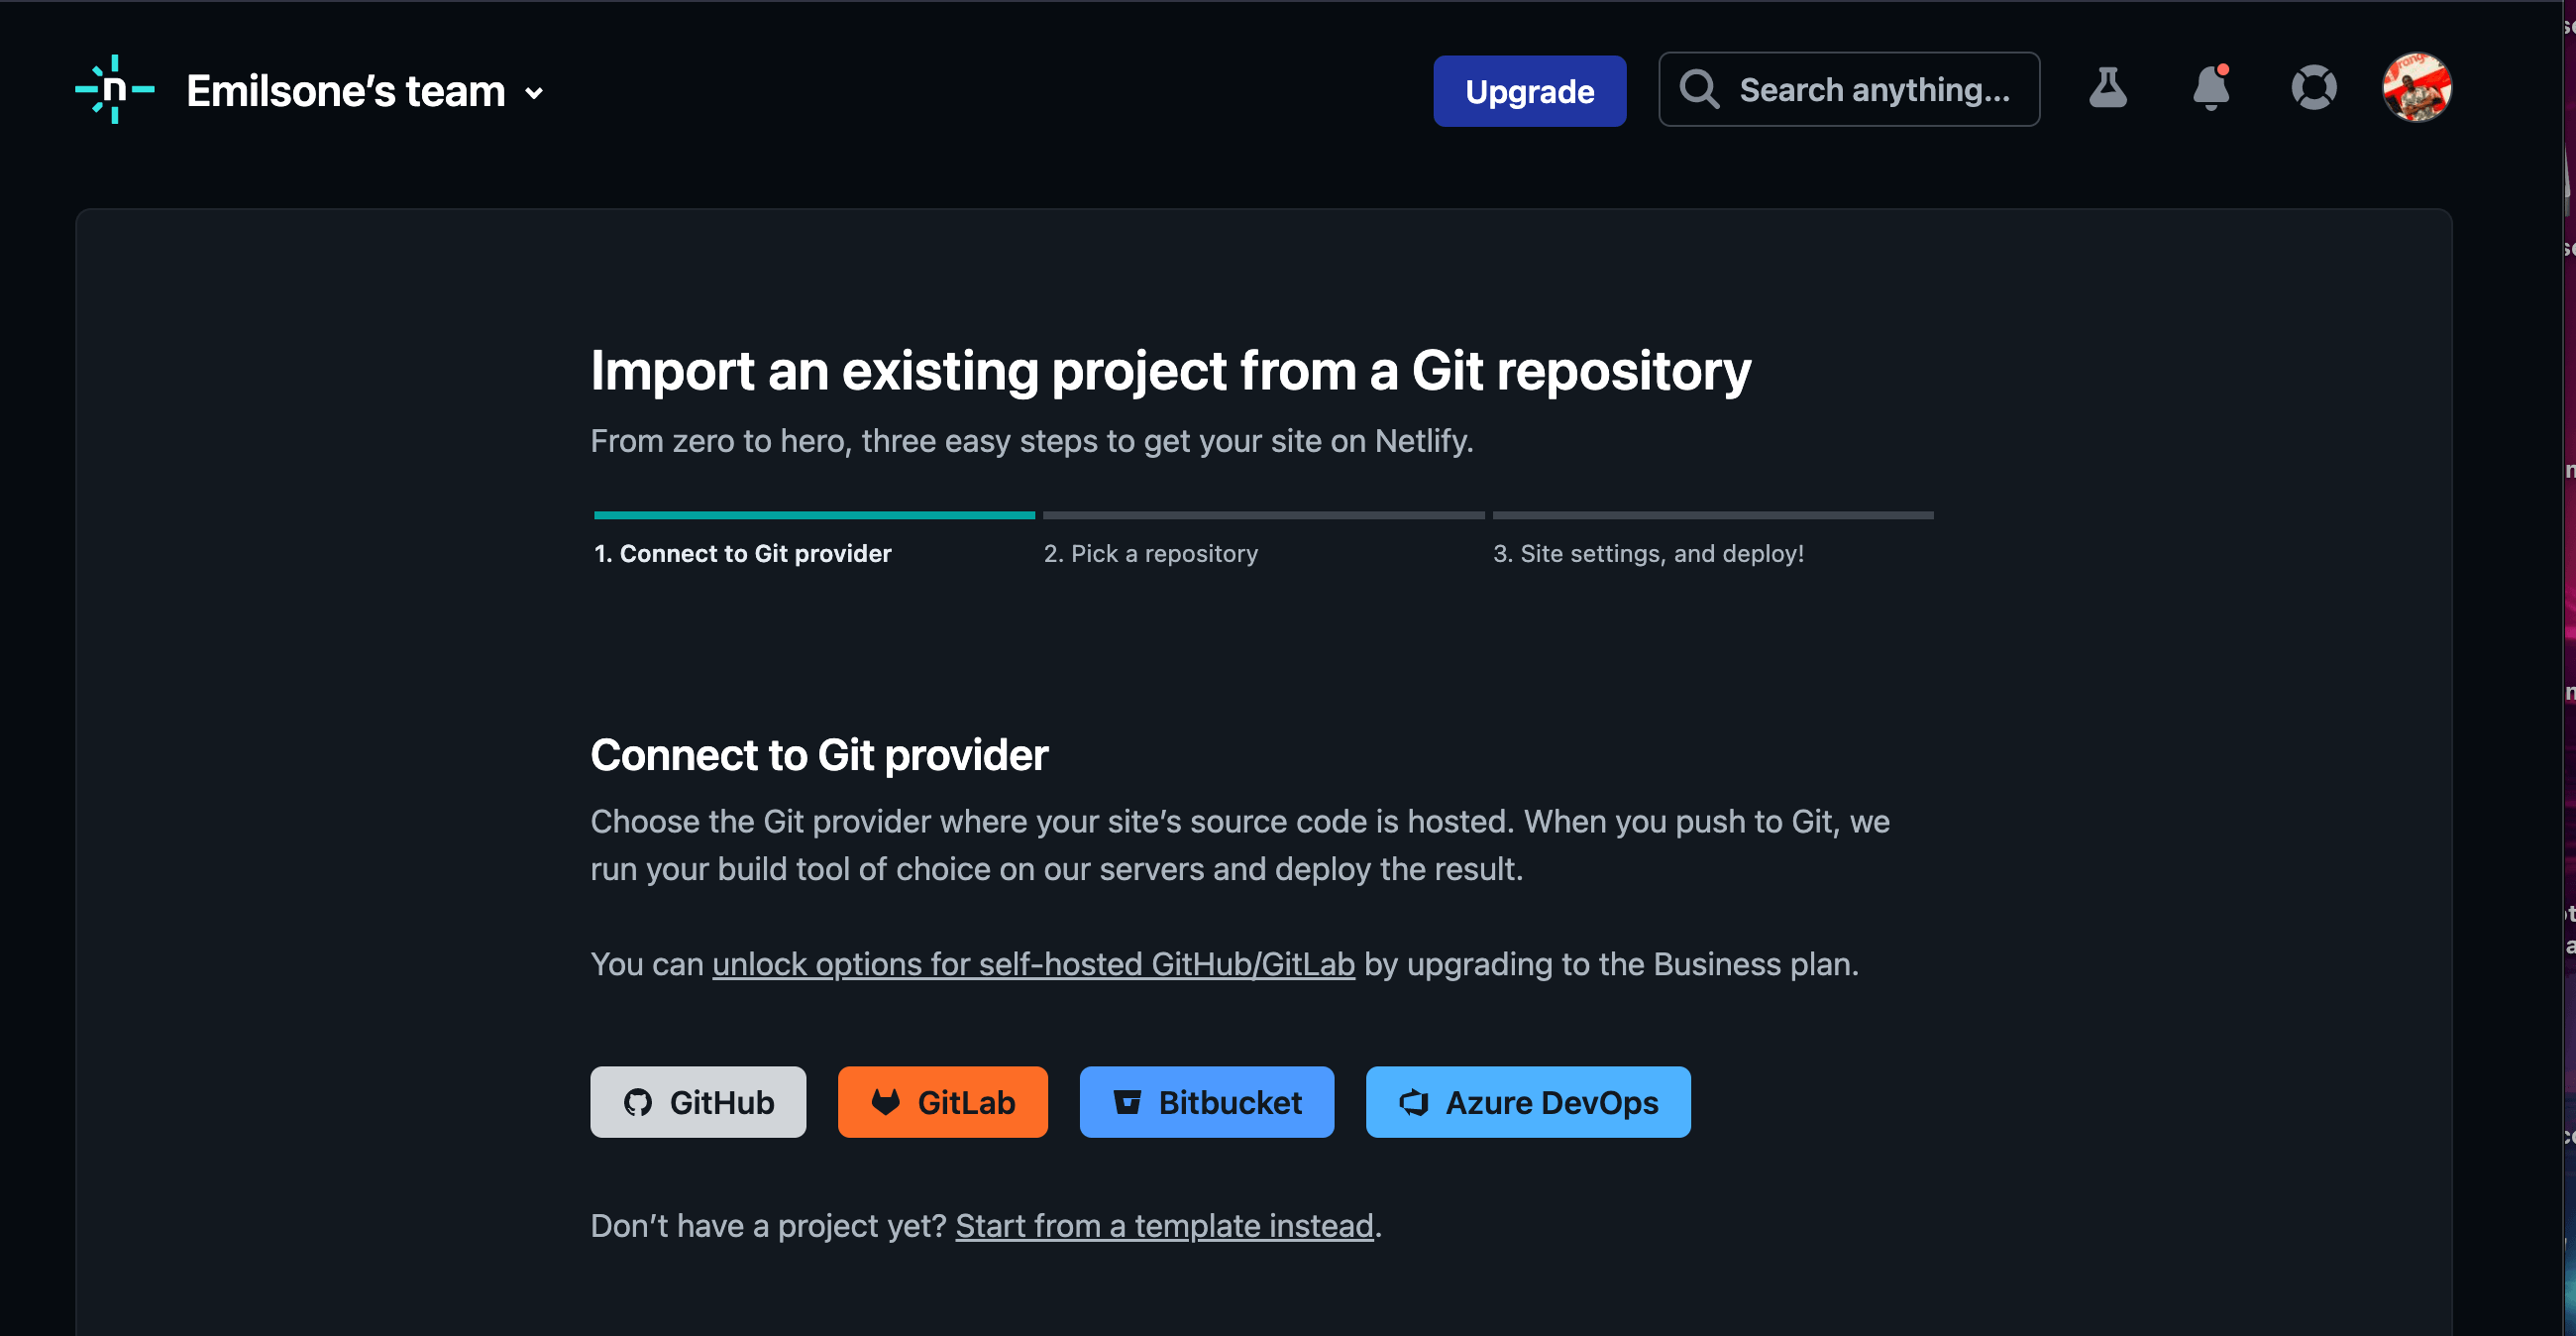 Import an existing project from a Git repository - select which Git provider to connect to from GitHub, GitLab, Bitbucket, Azure DevOps